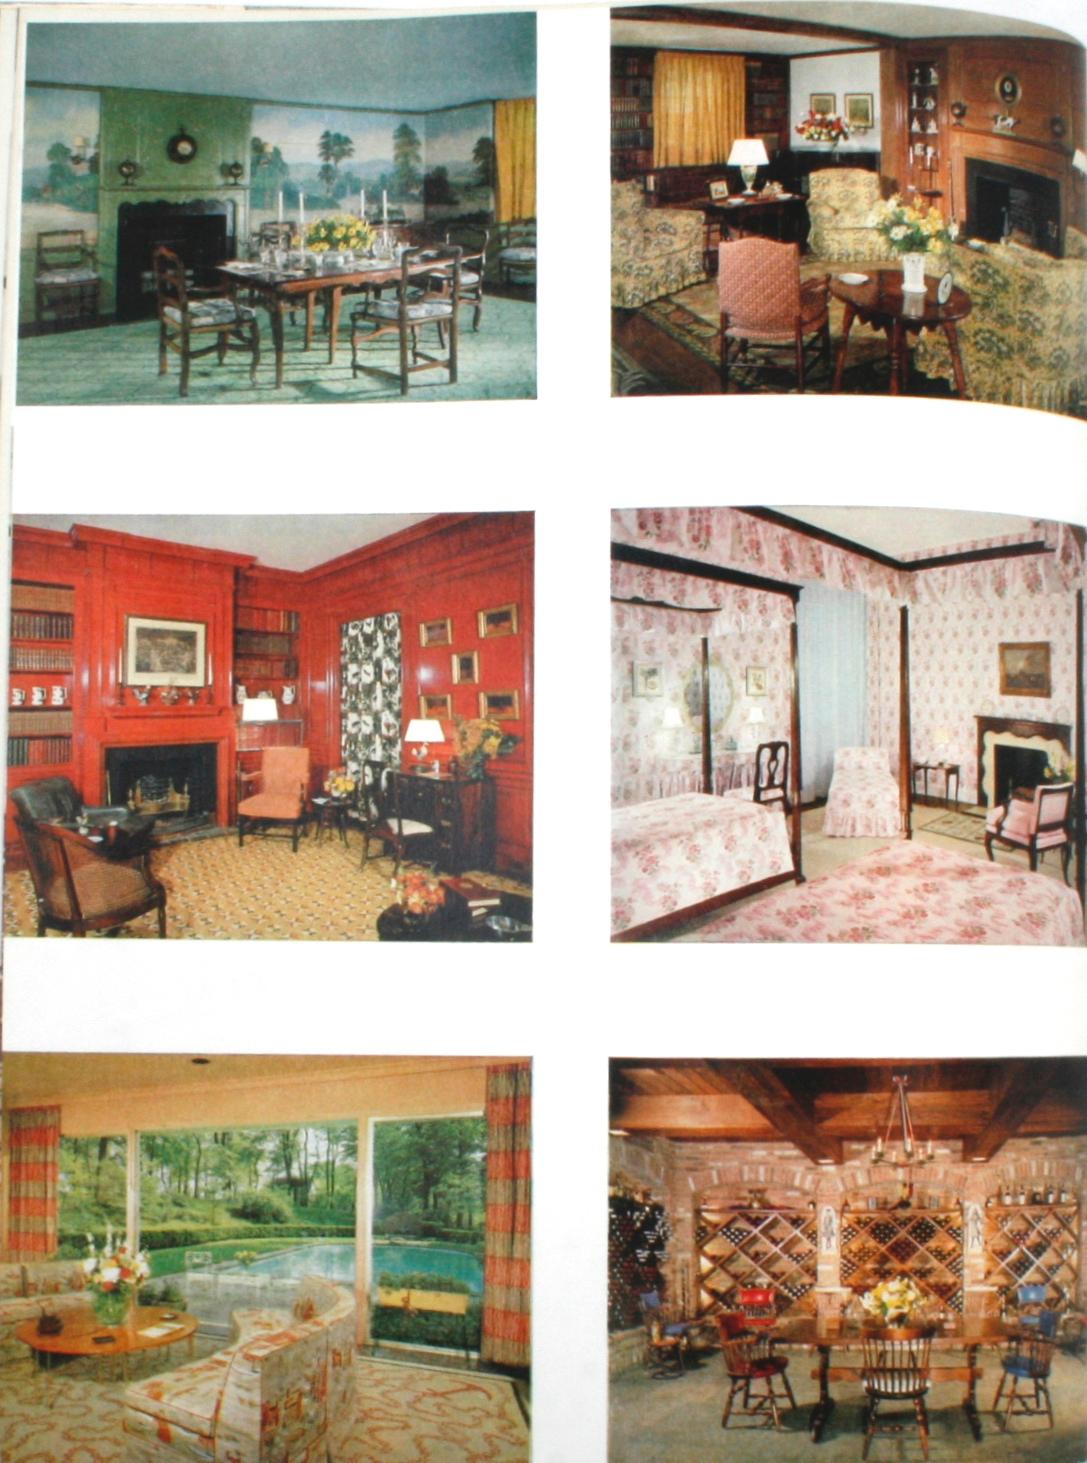 The Finest Rooms by America's Great Decorators, First Edition 1